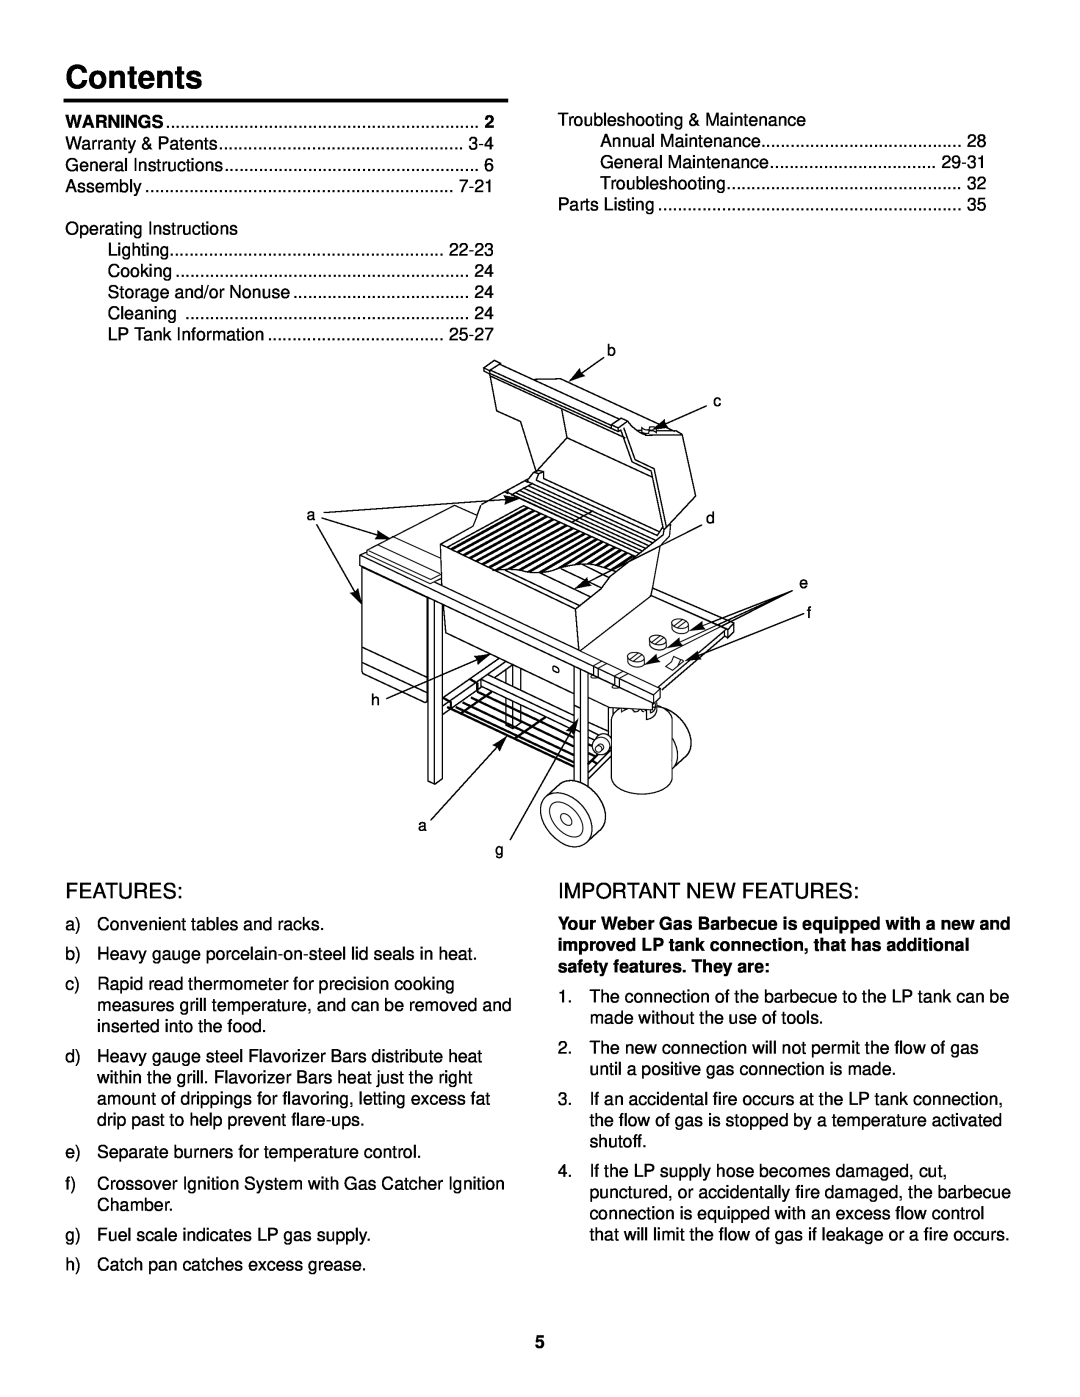 Weber 98583 owner manual Contents, Important New Features 